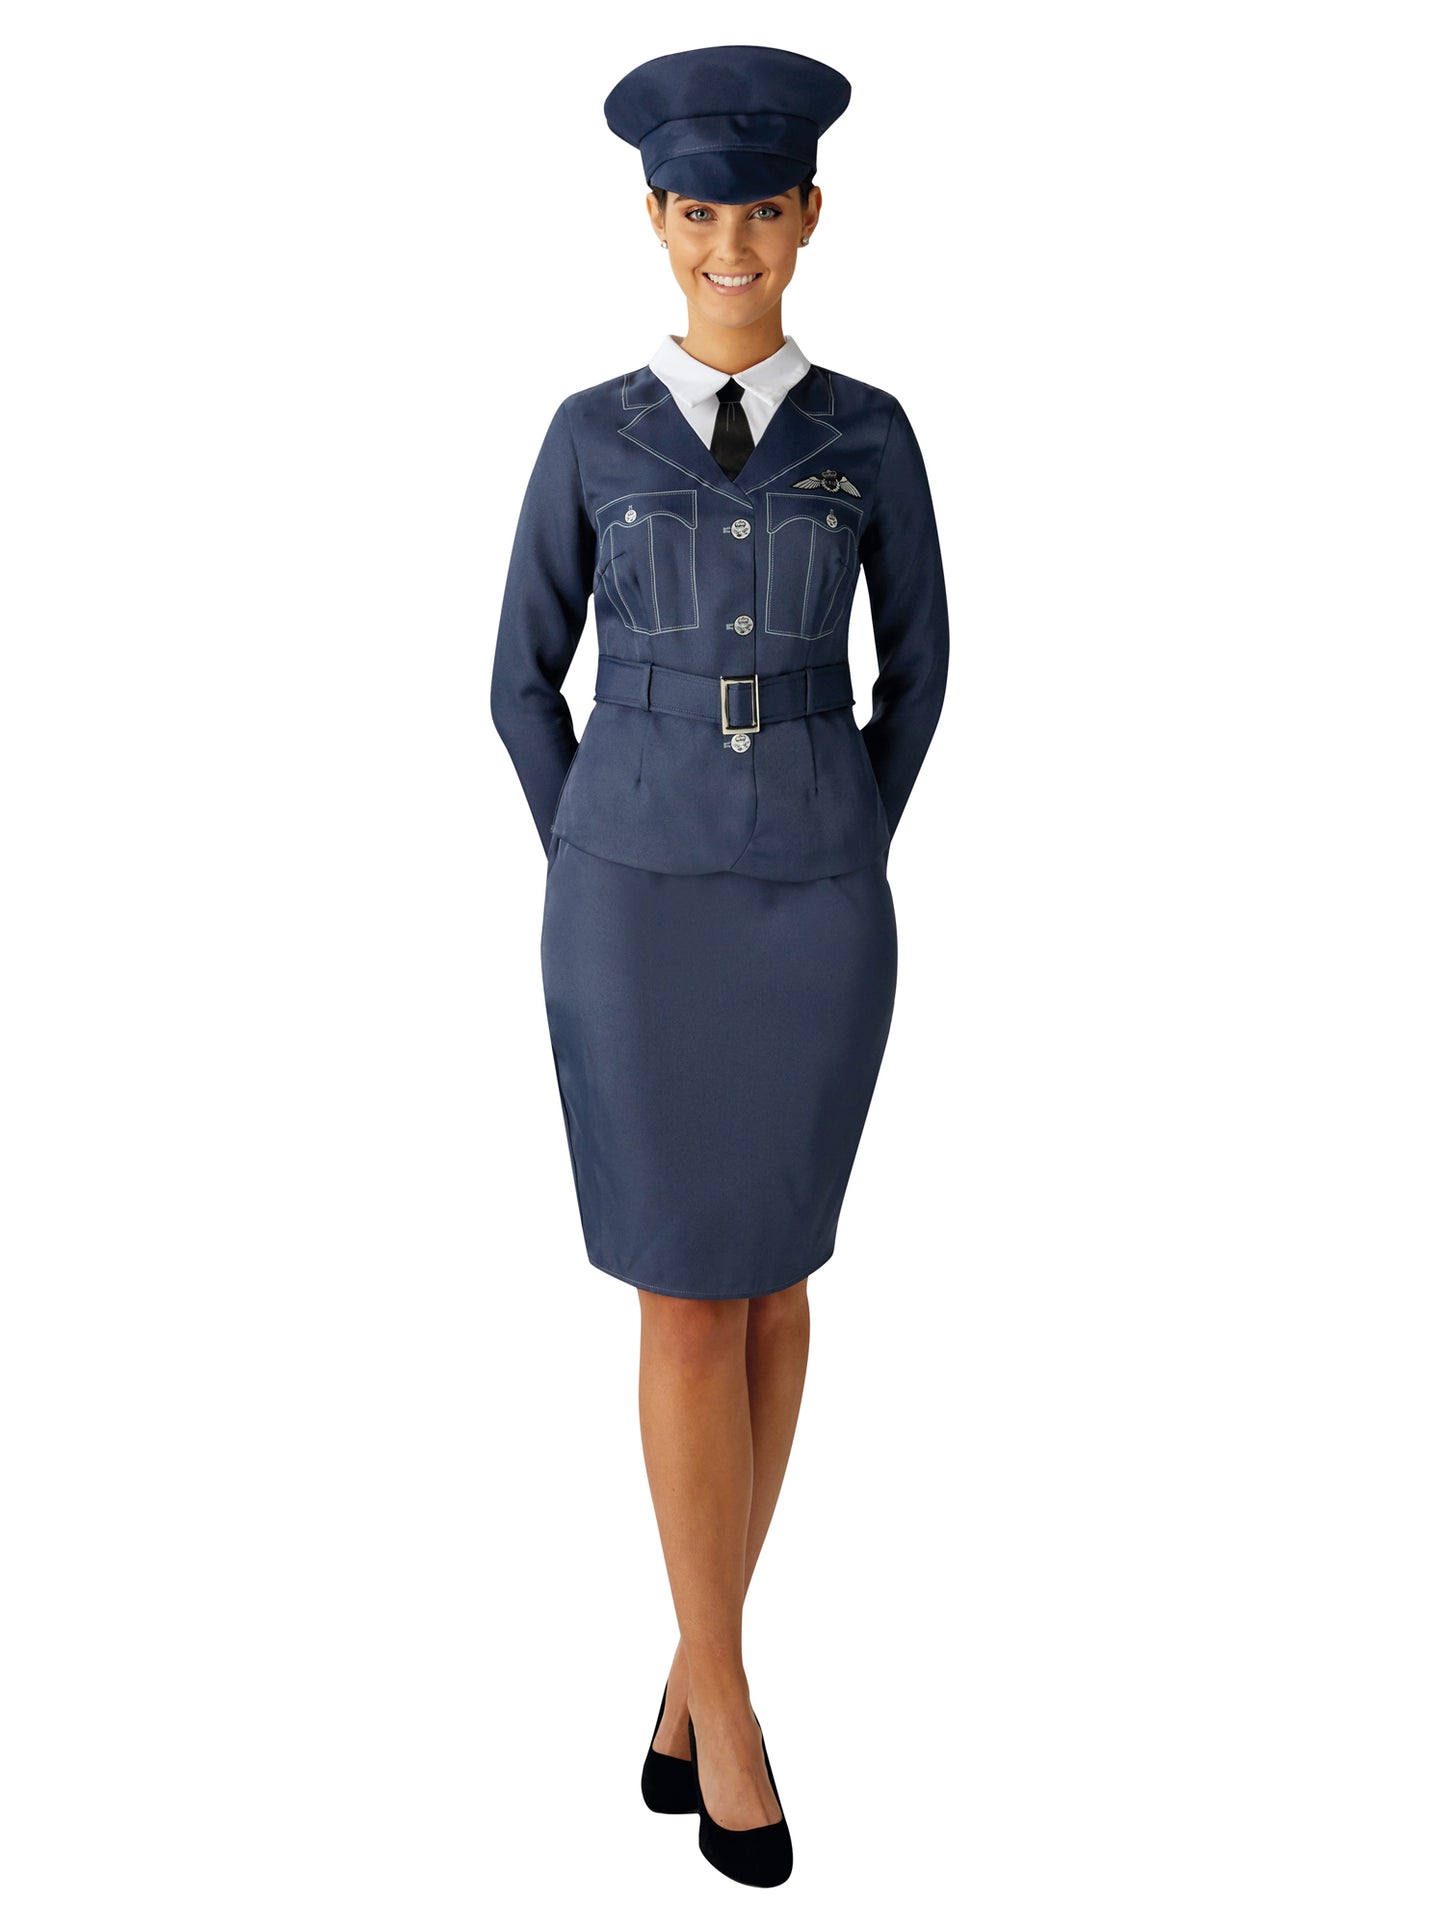 WRAF Girl Costume - on top promoted